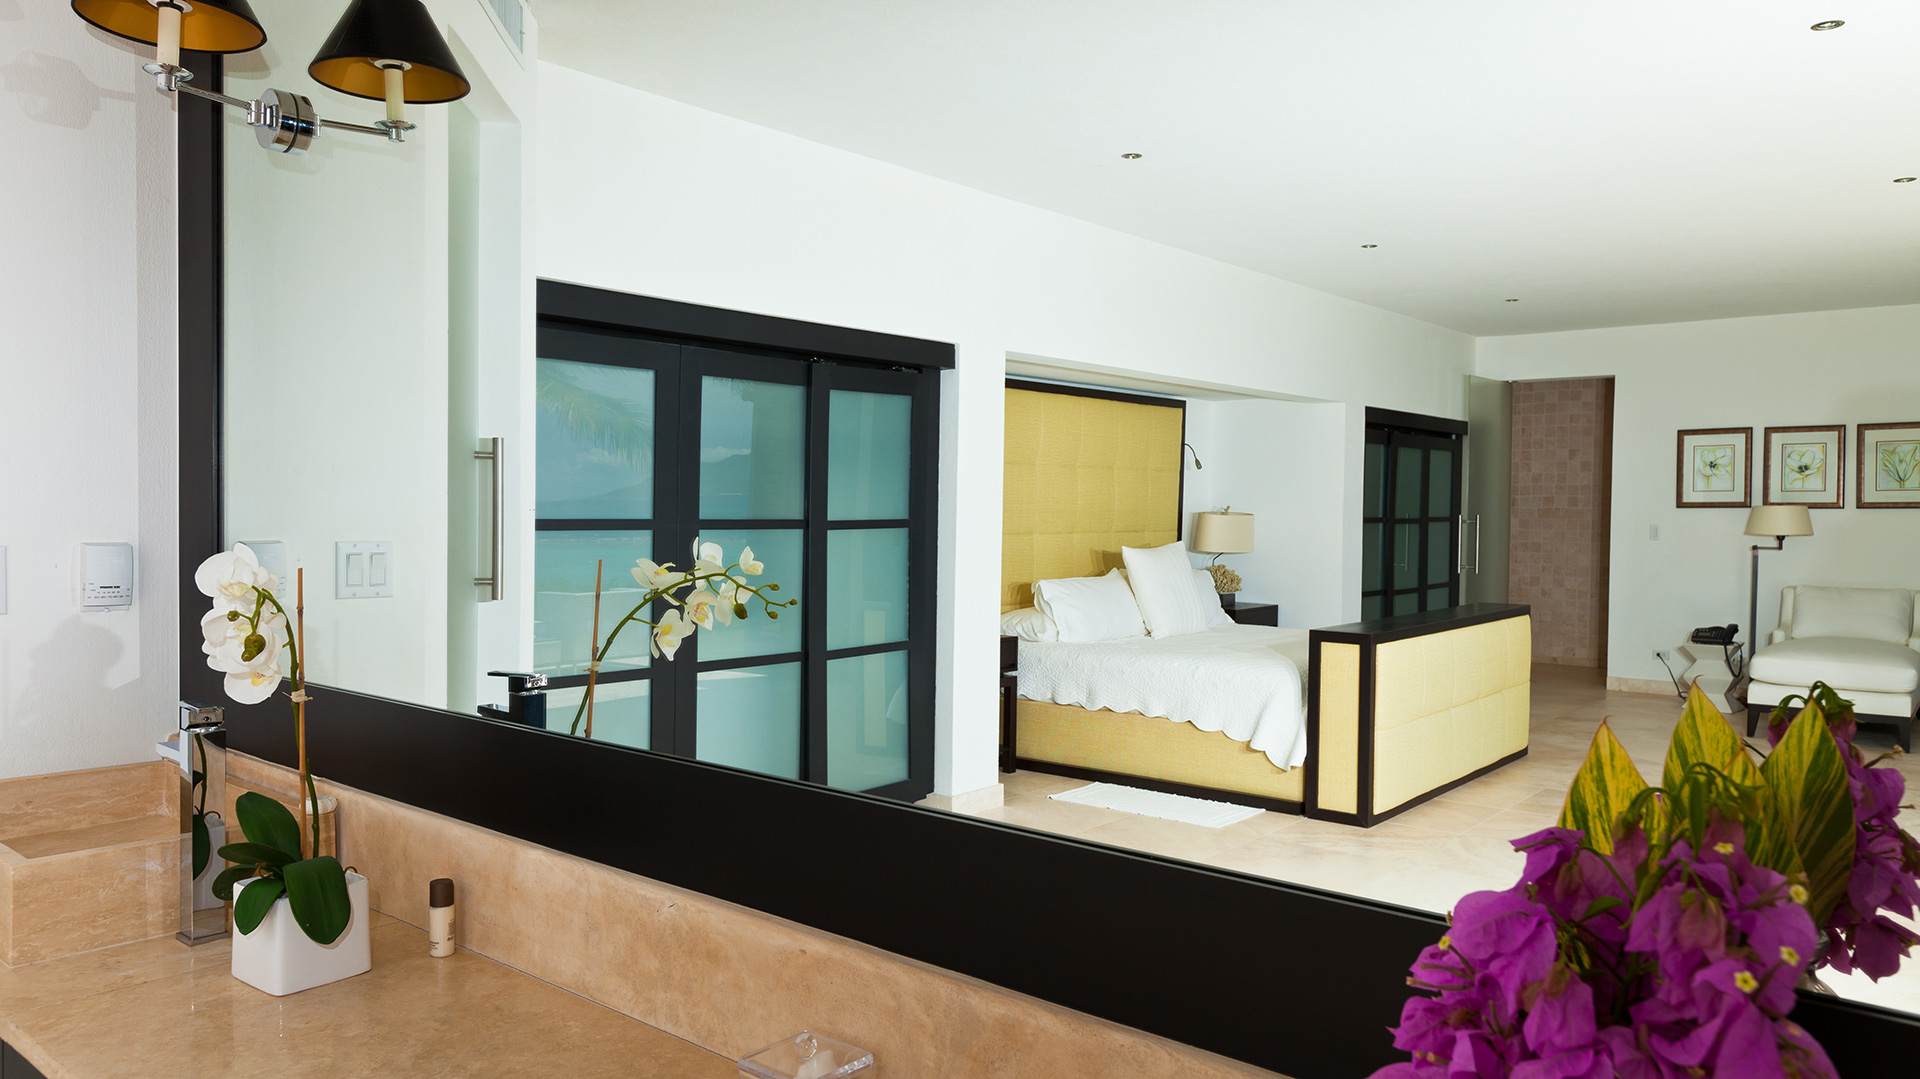 Each master suite offers tasteful and elegant interiors making Le Bleu Villa a sophisticated property.
